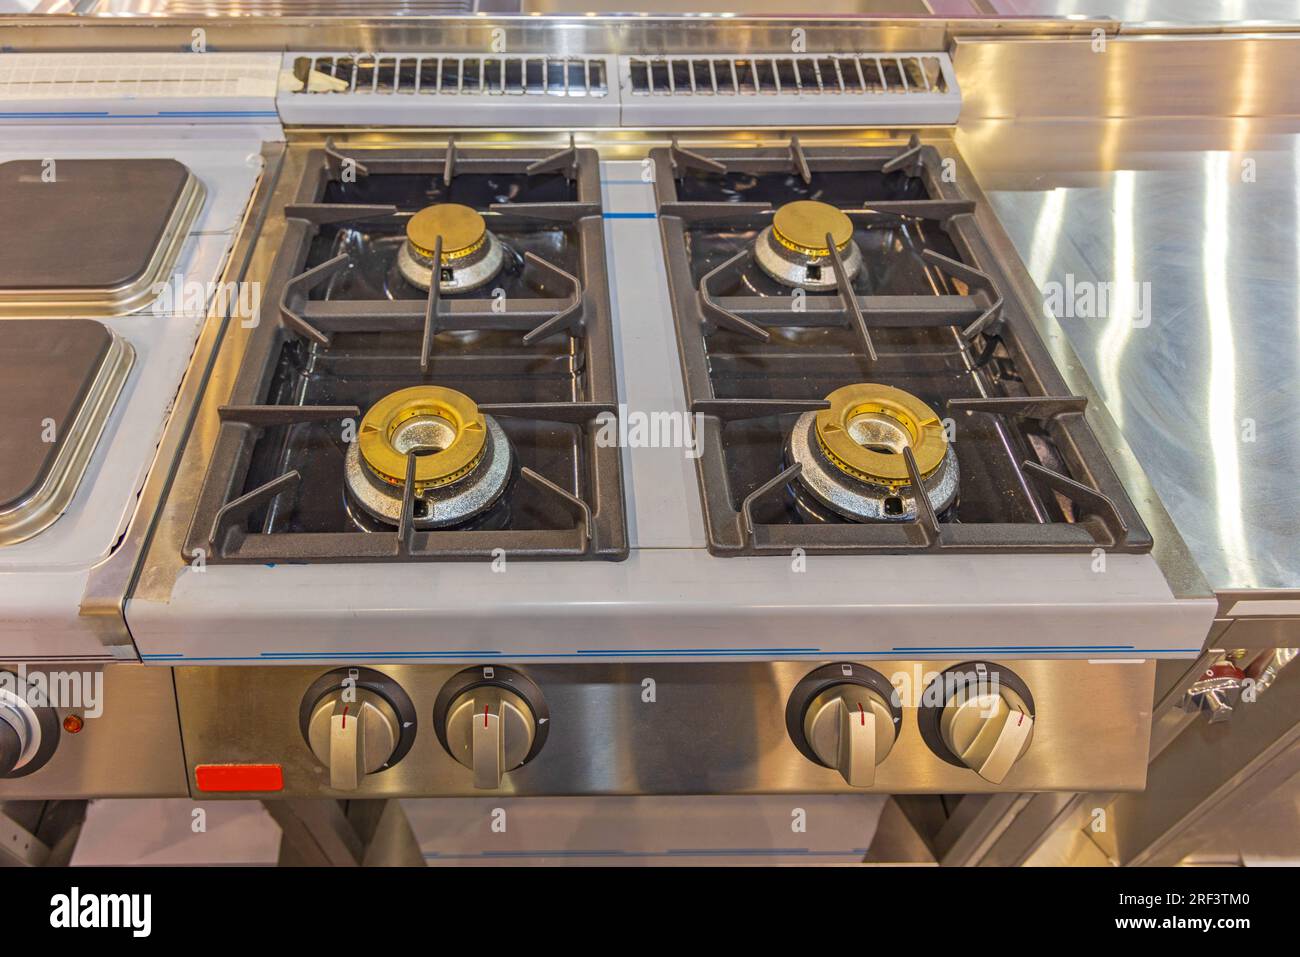 Large Gas Burner Hob Stove in Commercial Restaurant Kitchen Stock Photo